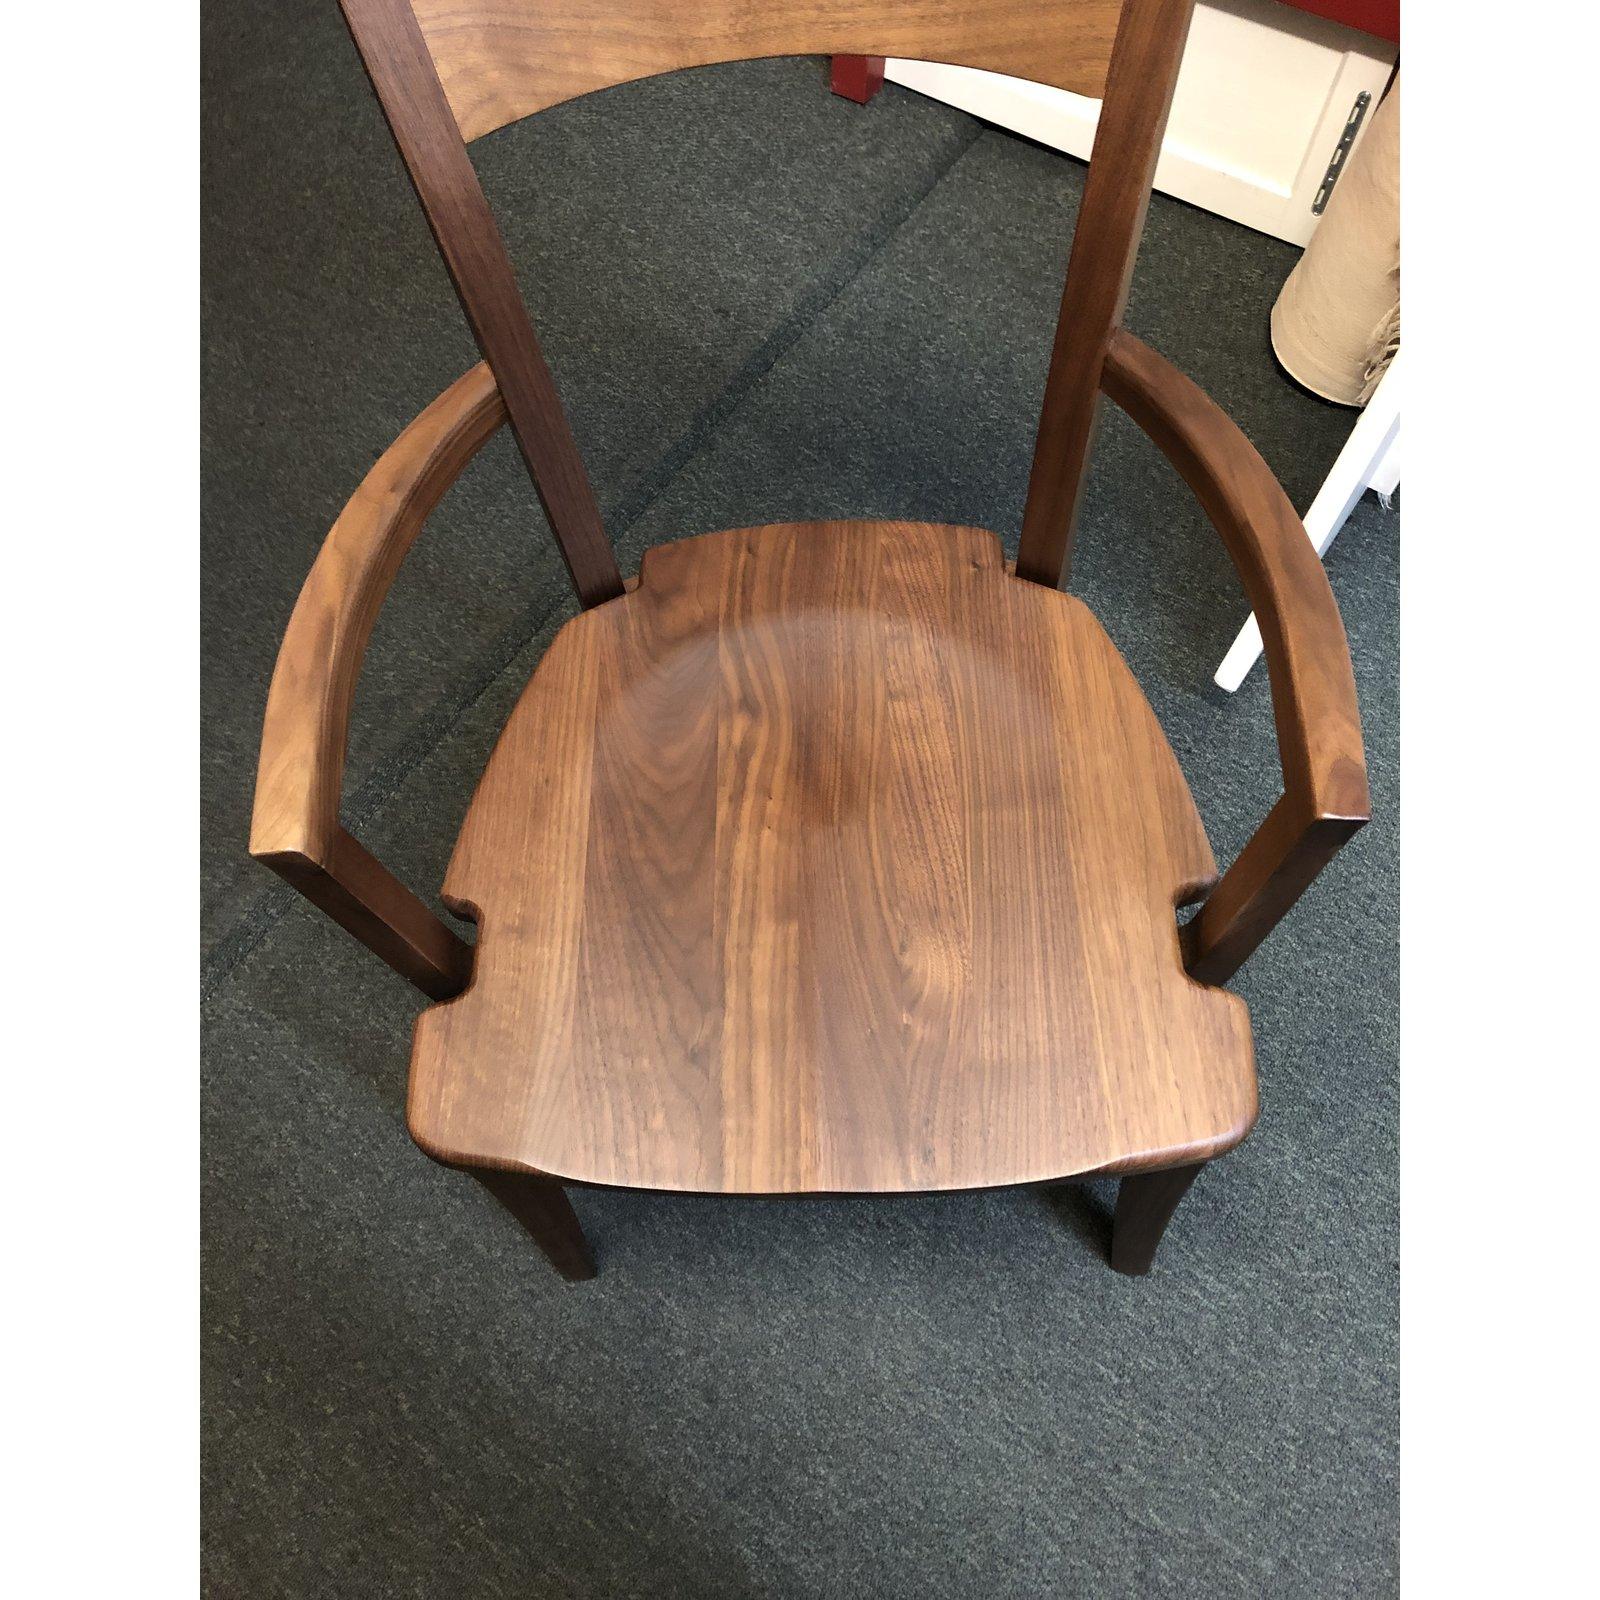 Custom Walnut Desk and Chair by Vermont Wood Studio For Sale 4